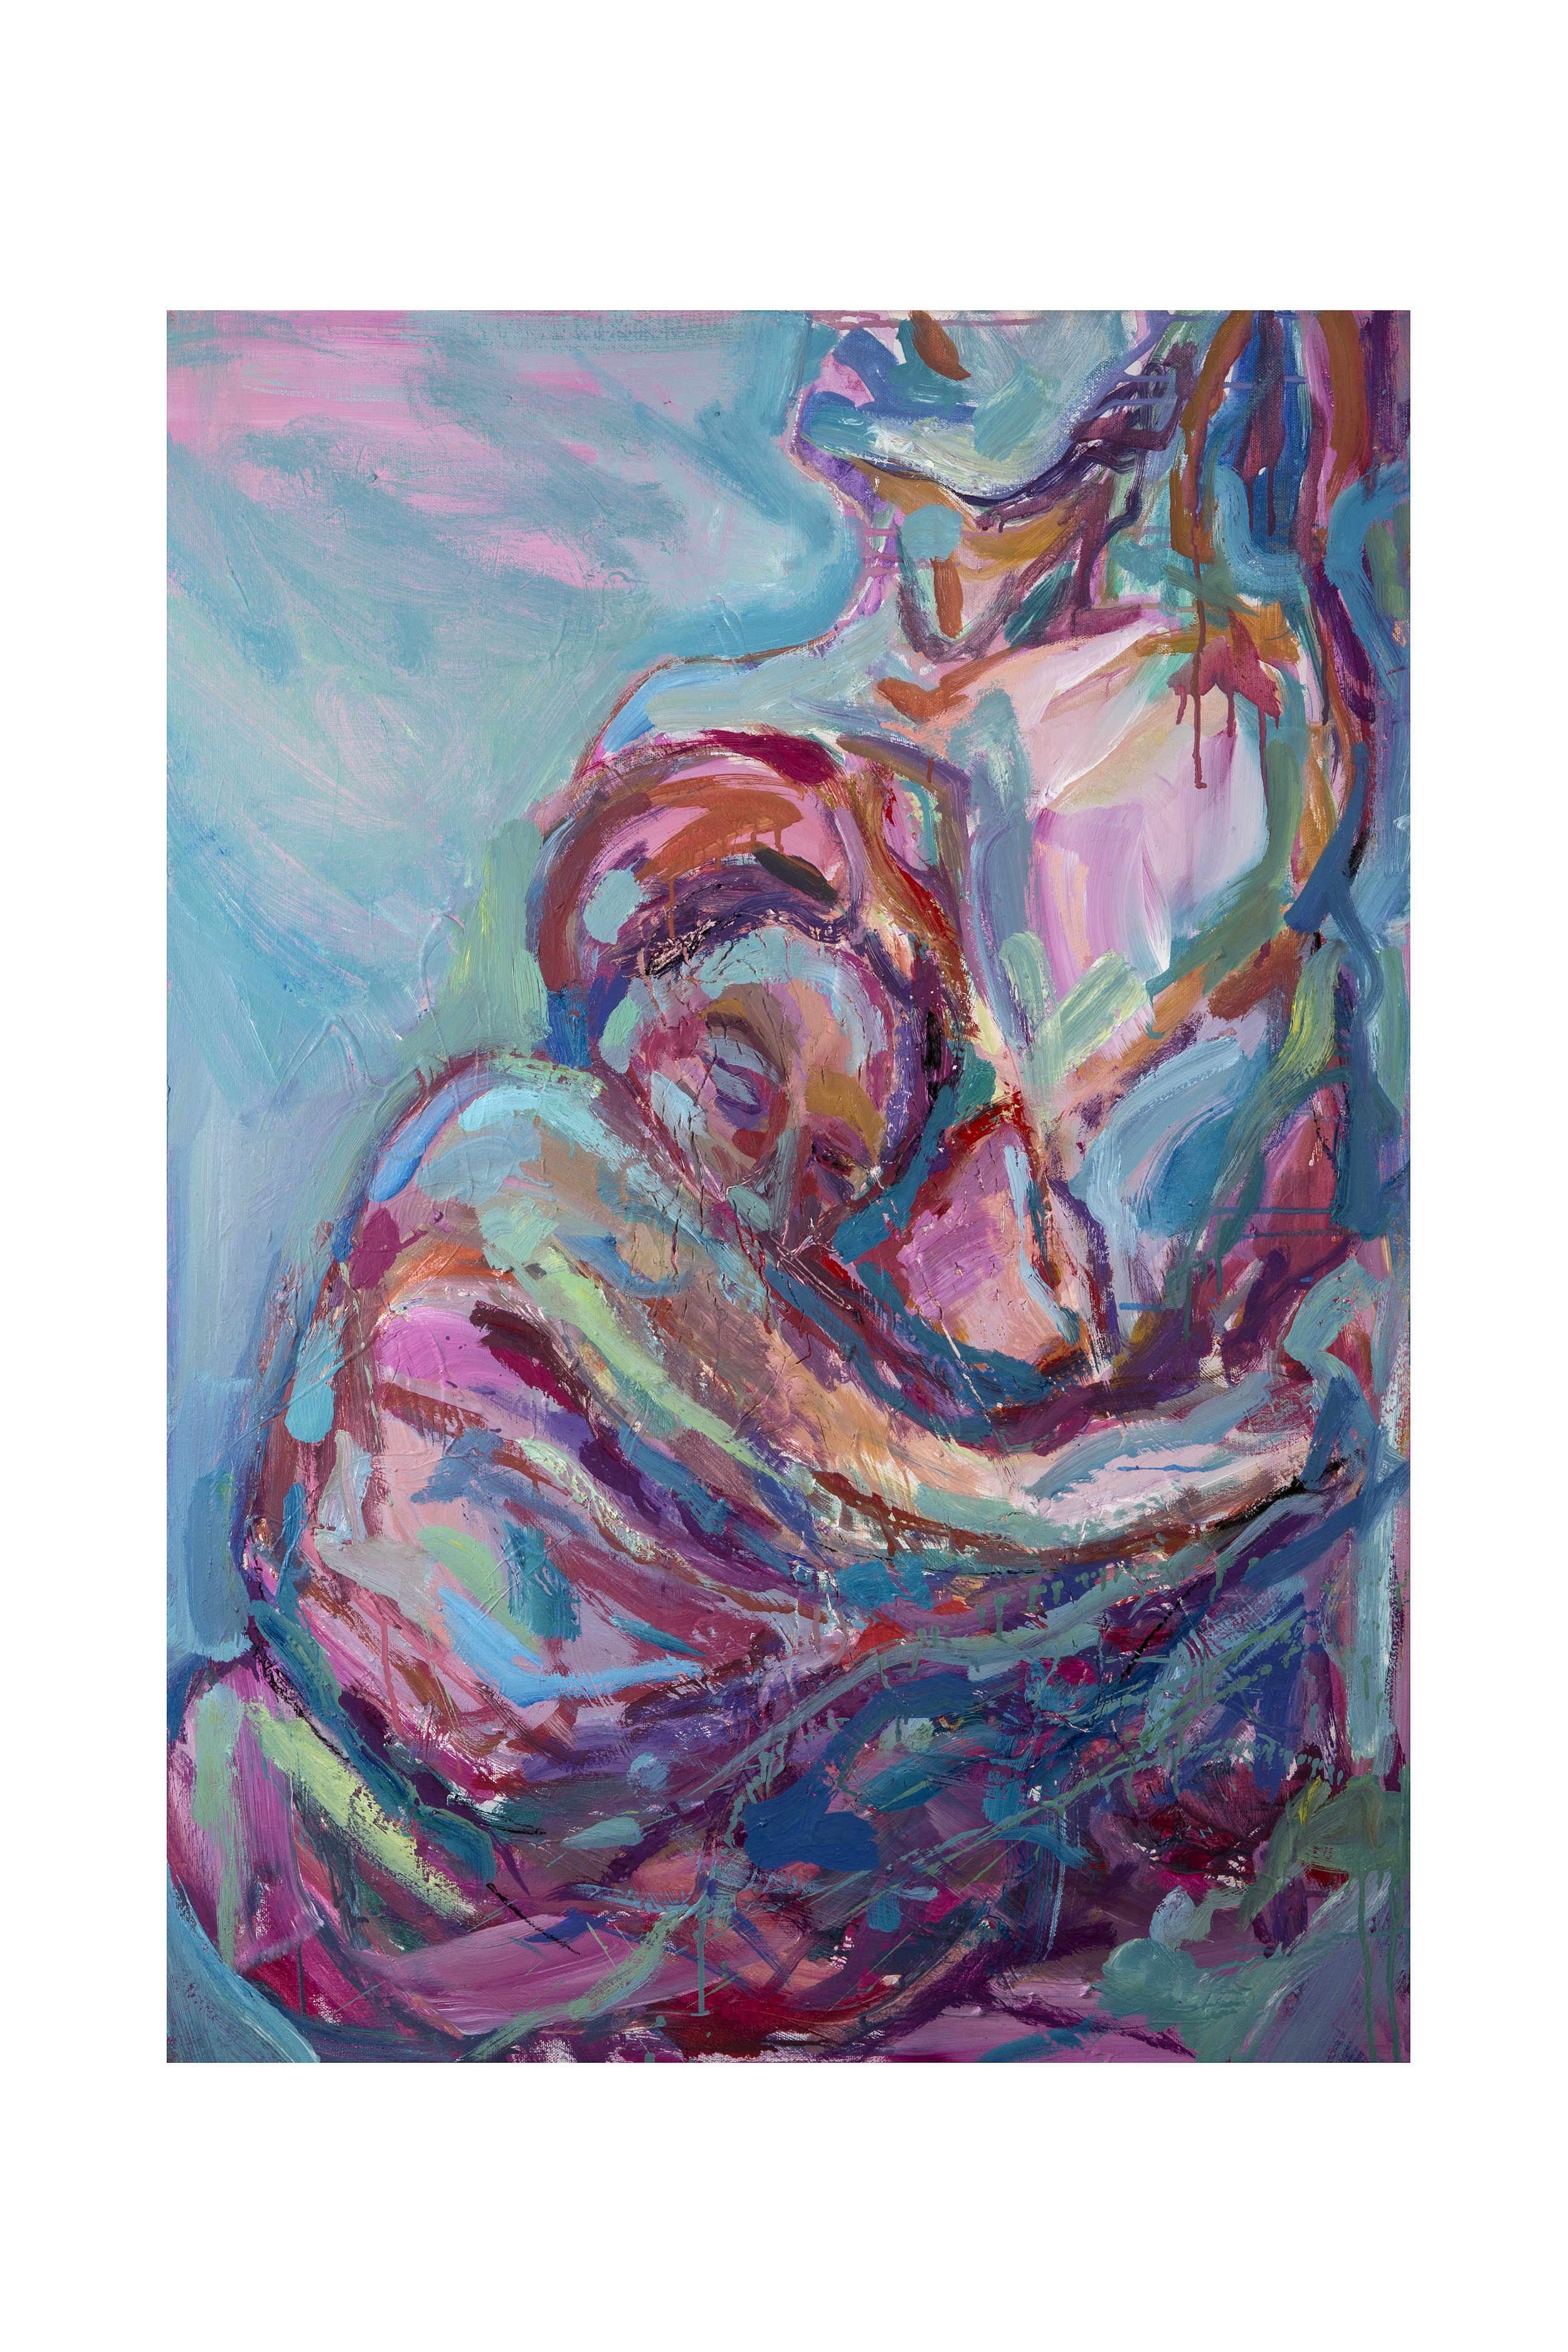 SOLD The Embrace II, oil on canvas, 80 x 100 cm, 2020